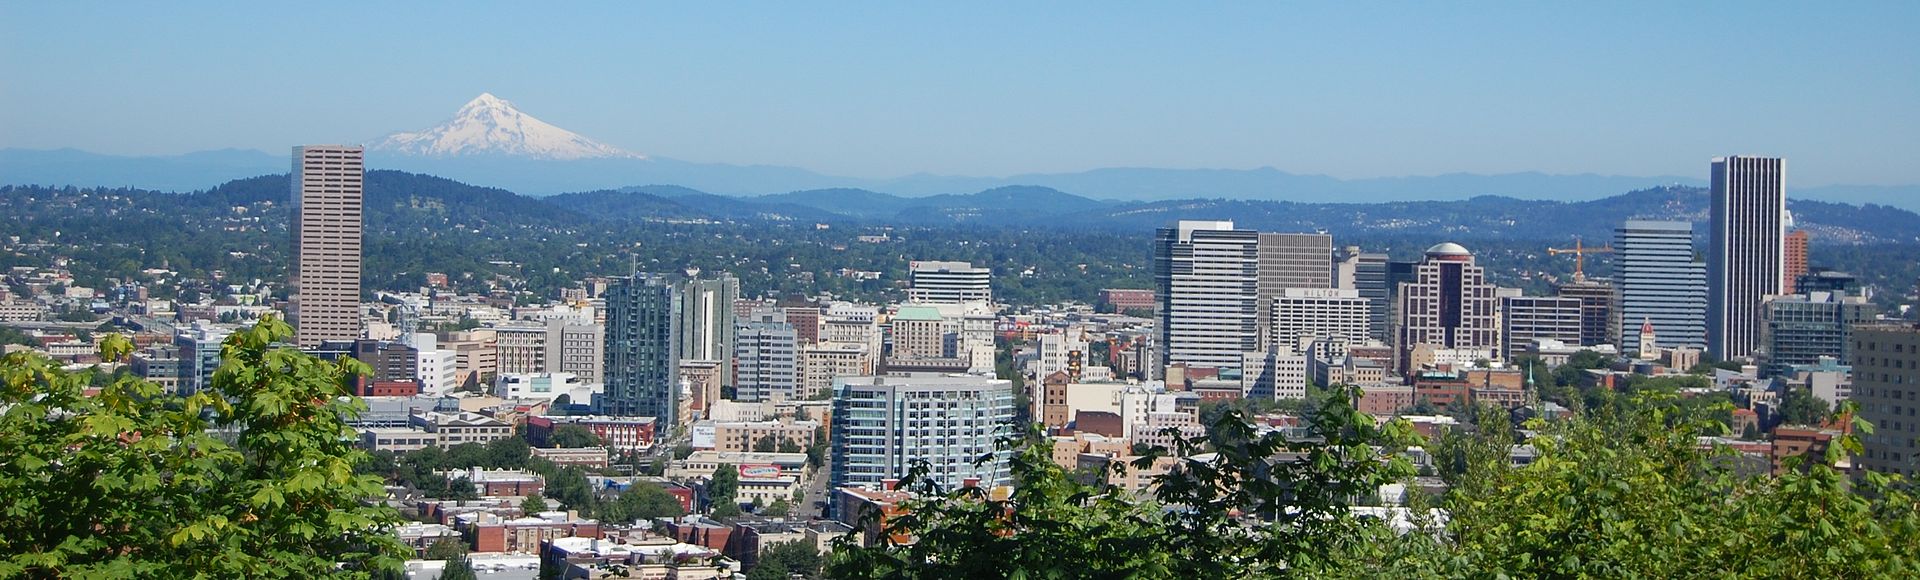 Portland owes its name to a coin toss ©Wikipedia